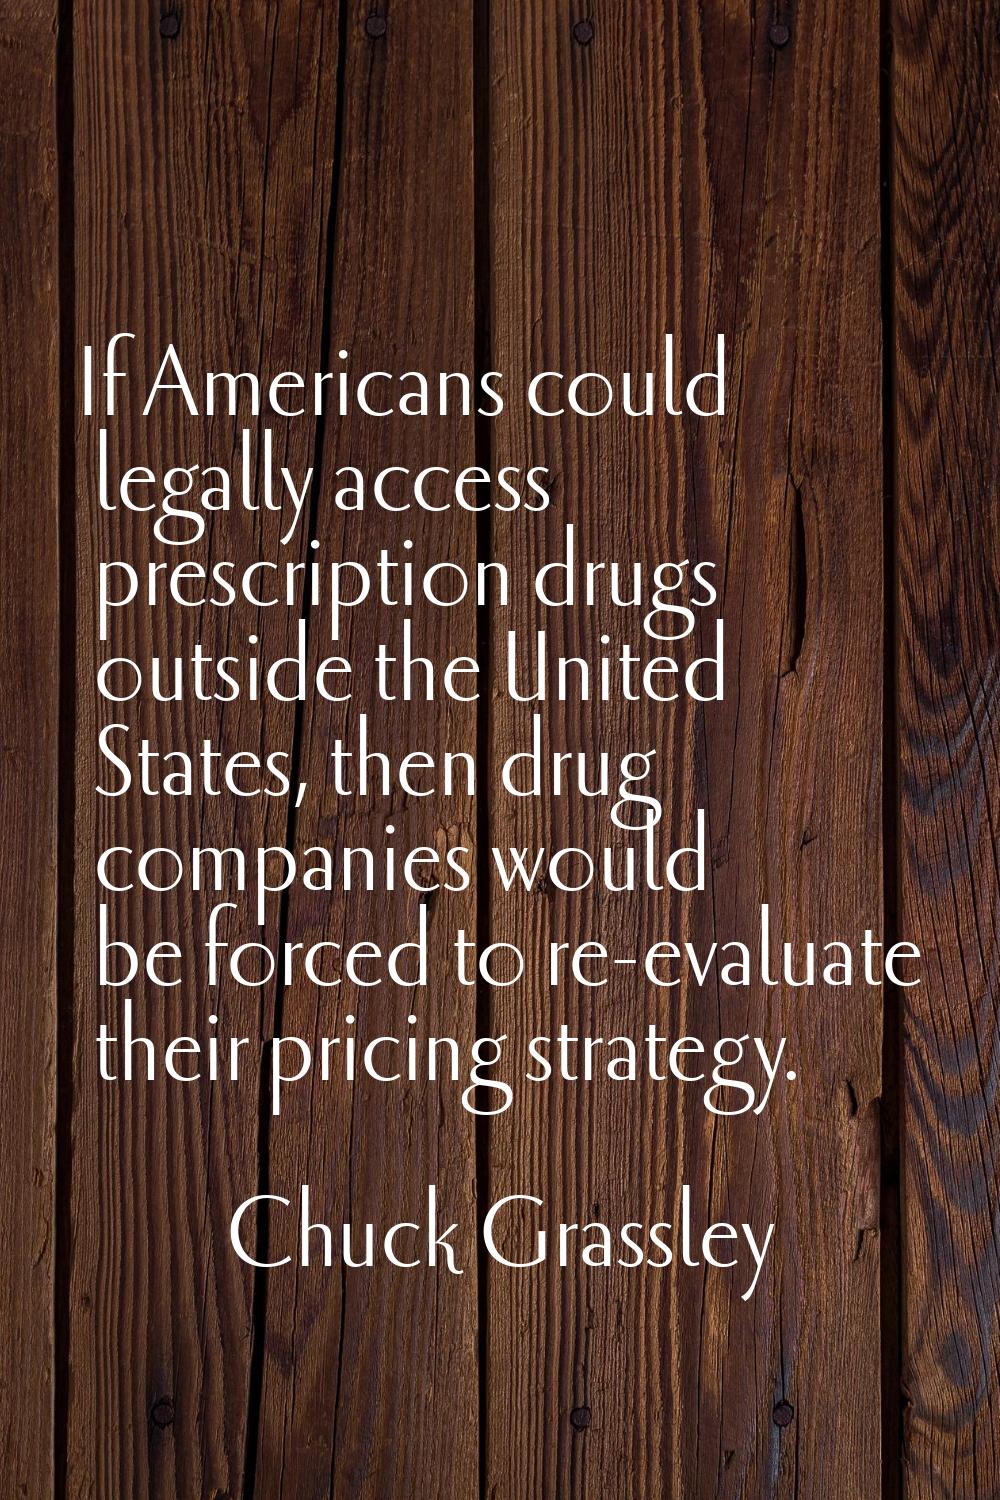 If Americans could legally access prescription drugs outside the United States, then drug companies